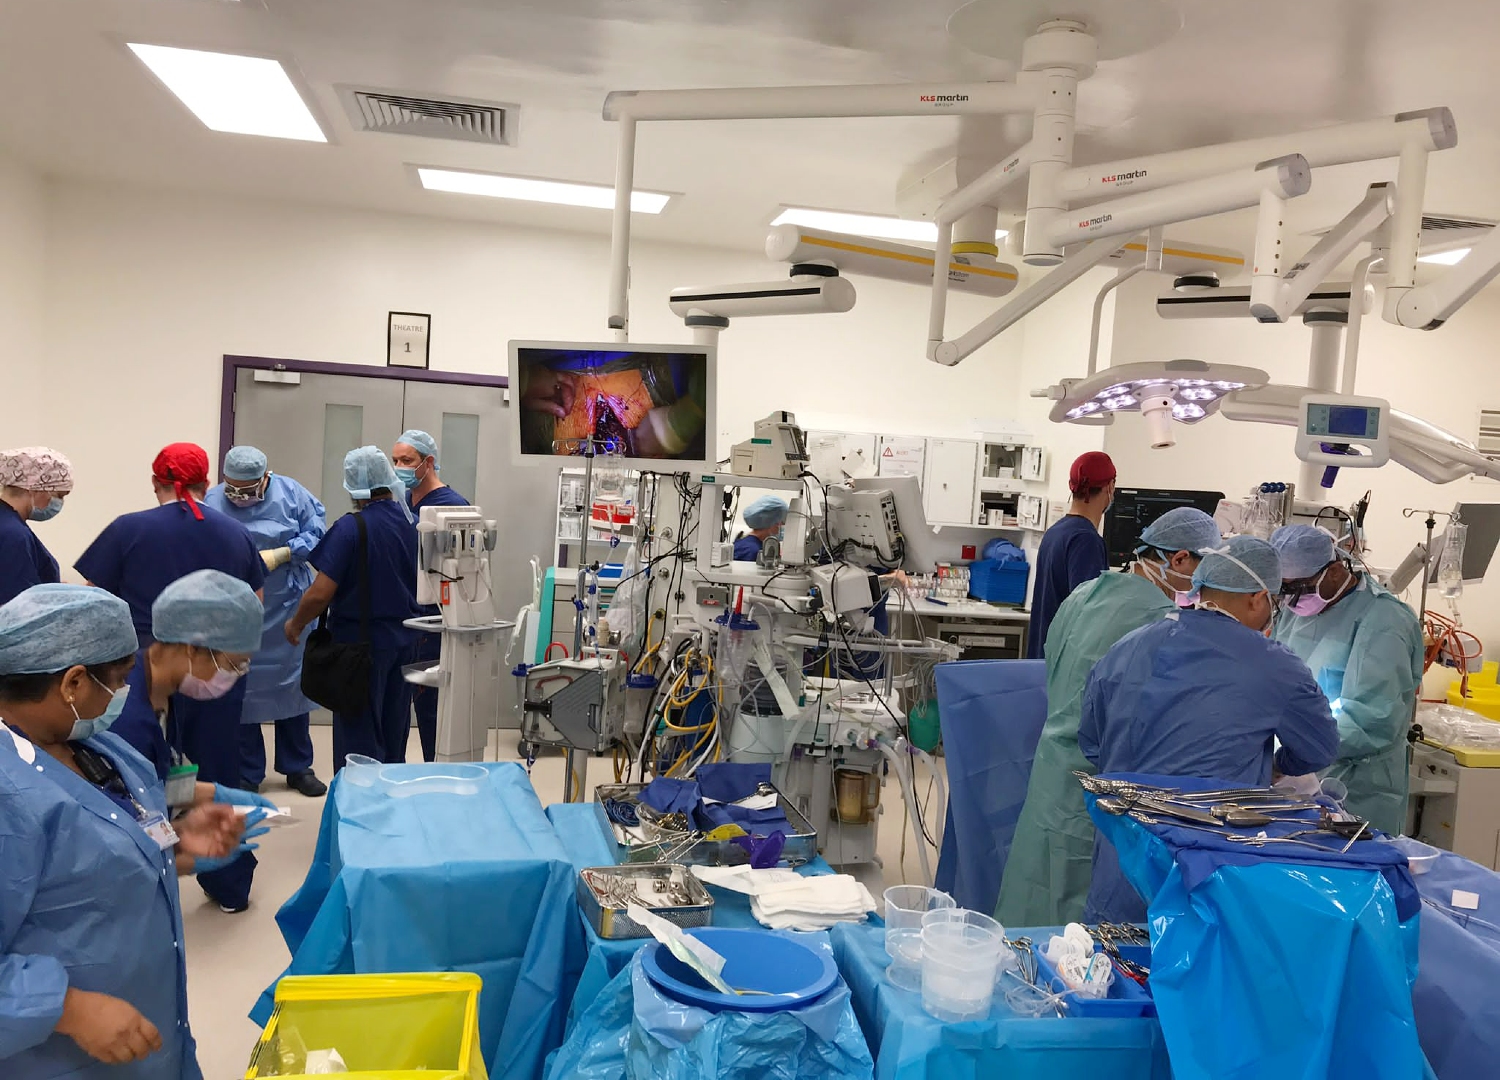 People inside an operating theatre during surgery.